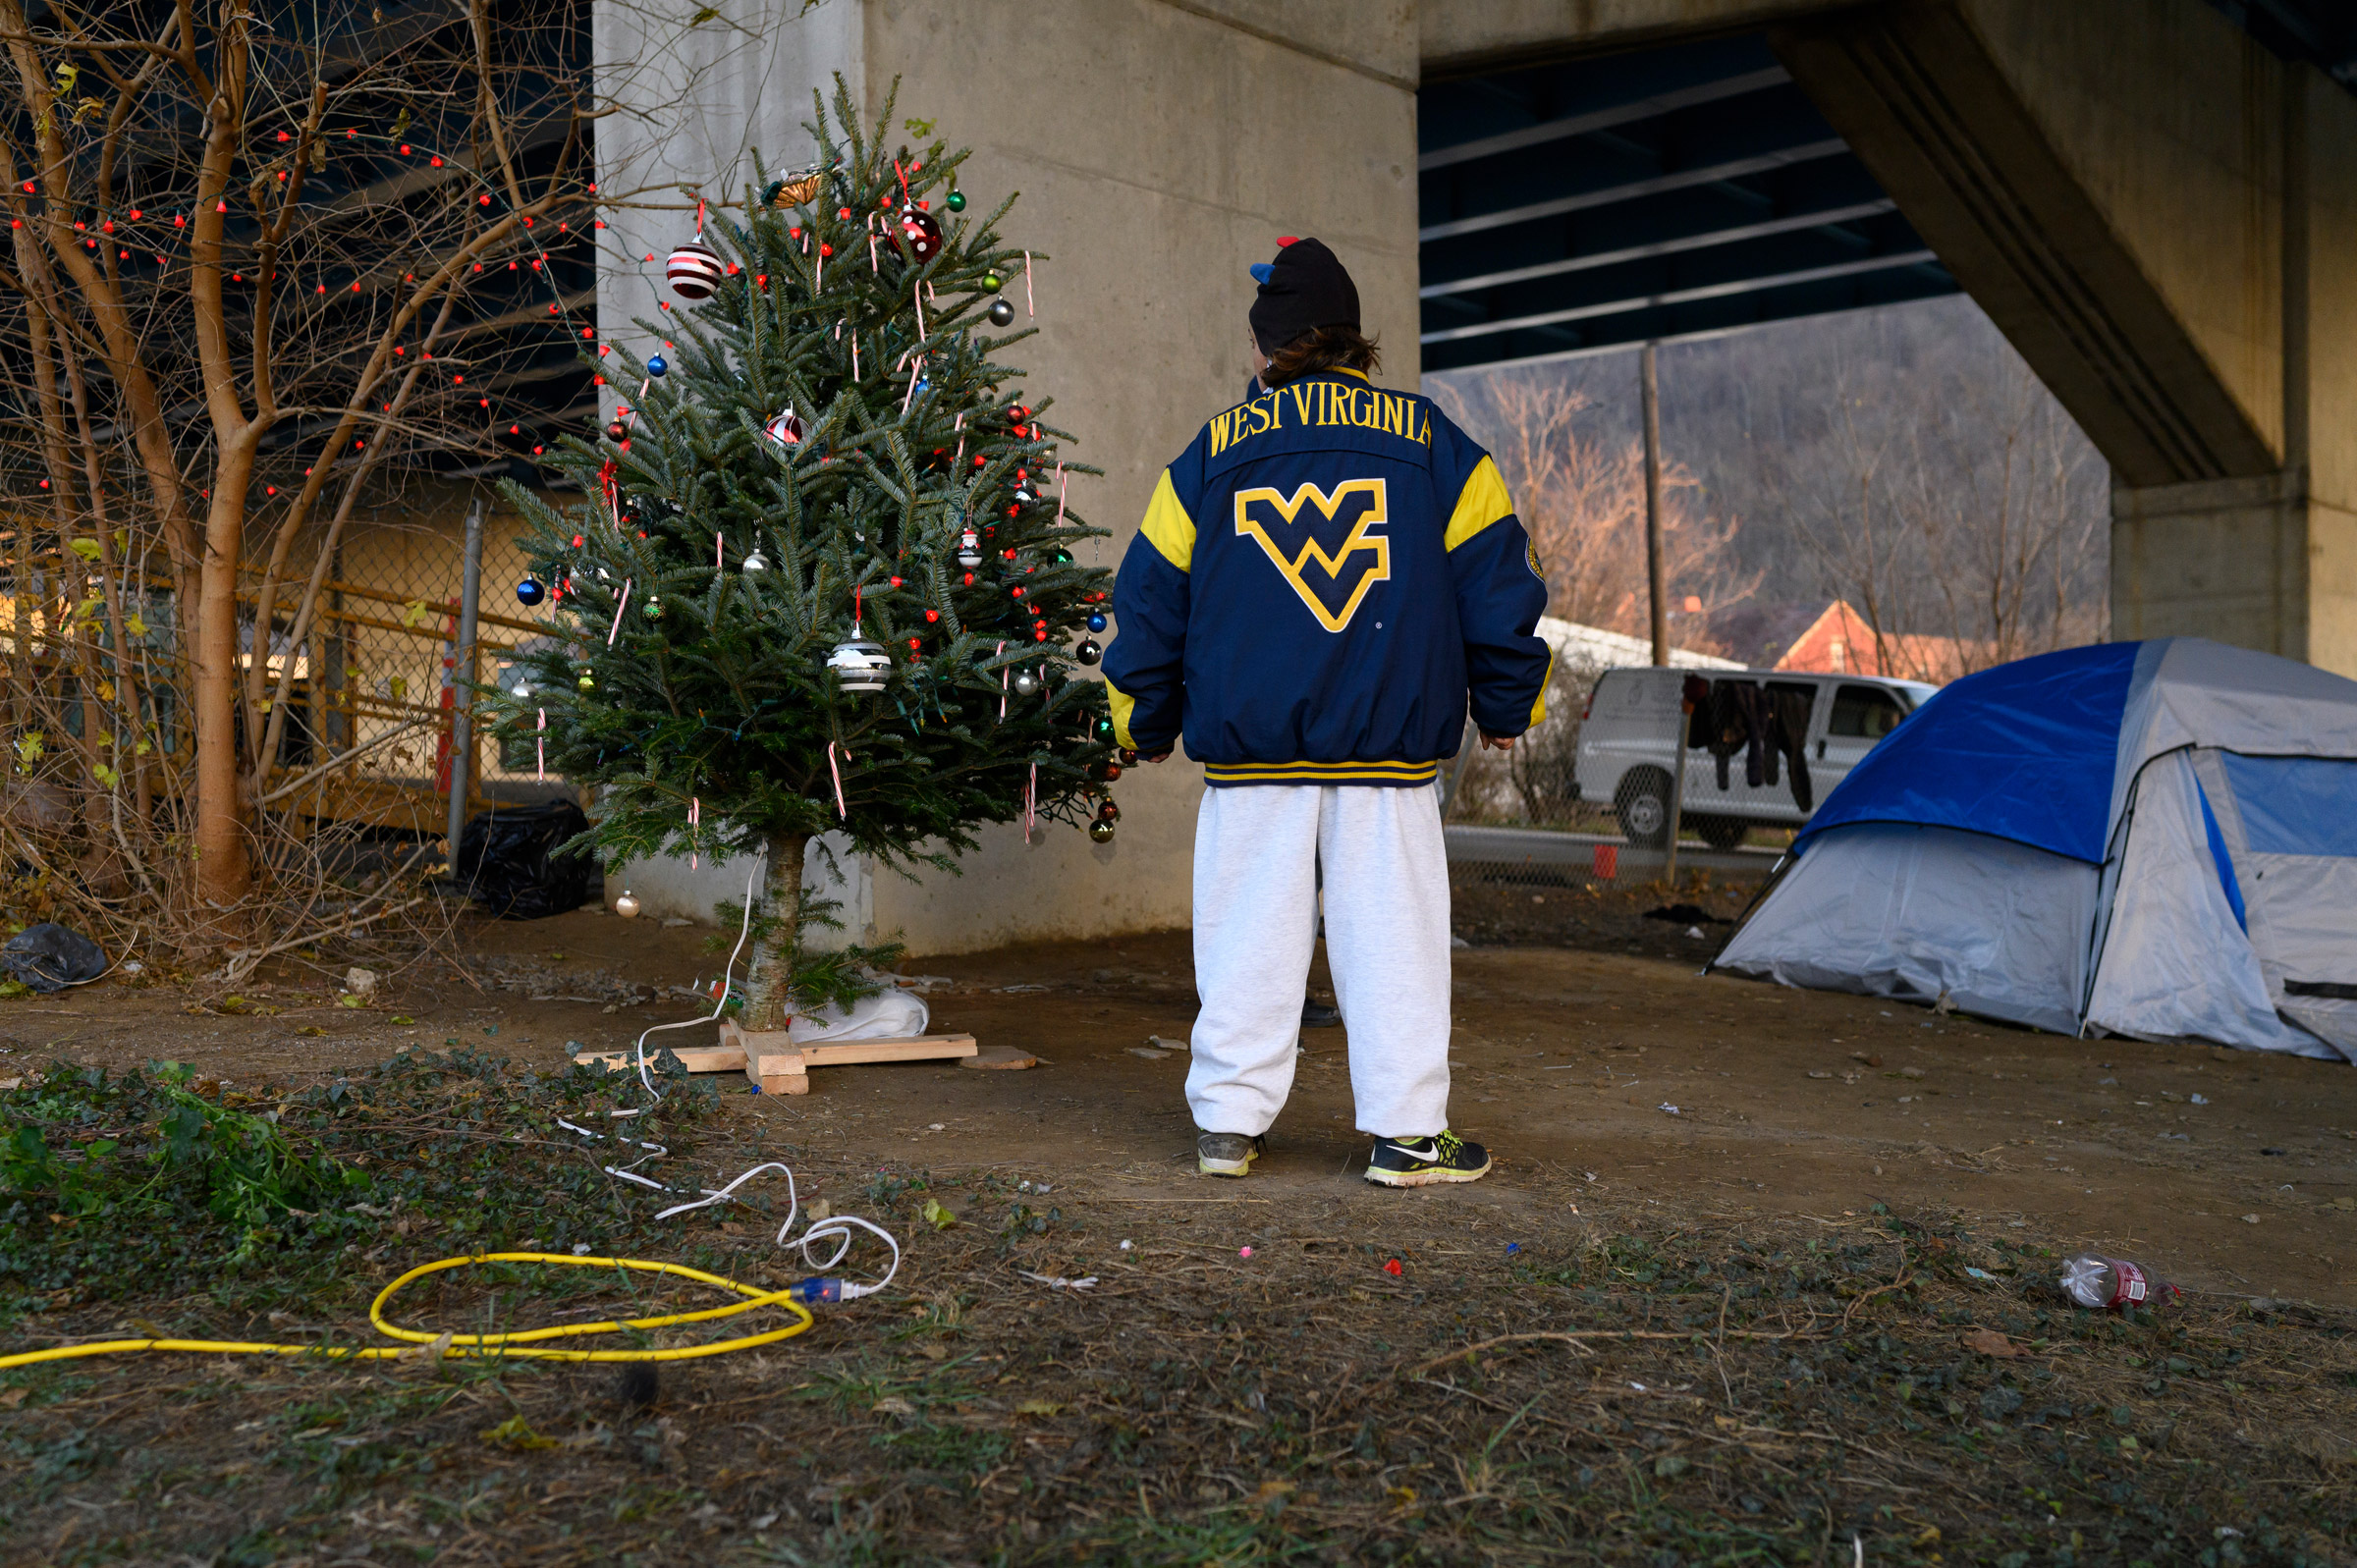 Chrissy stands by a Christmas tree in her encampment on Dec. 9. Chrissy helped bring the tree with others to hold a celebration and sing carols. After complaints, the City of Wheeling removed the tree's power, citing that they agreed to supply electricity for a temporary shower station adjacent to the camp but had not agreed to have it used for anything else. (Rebecca Kiger)